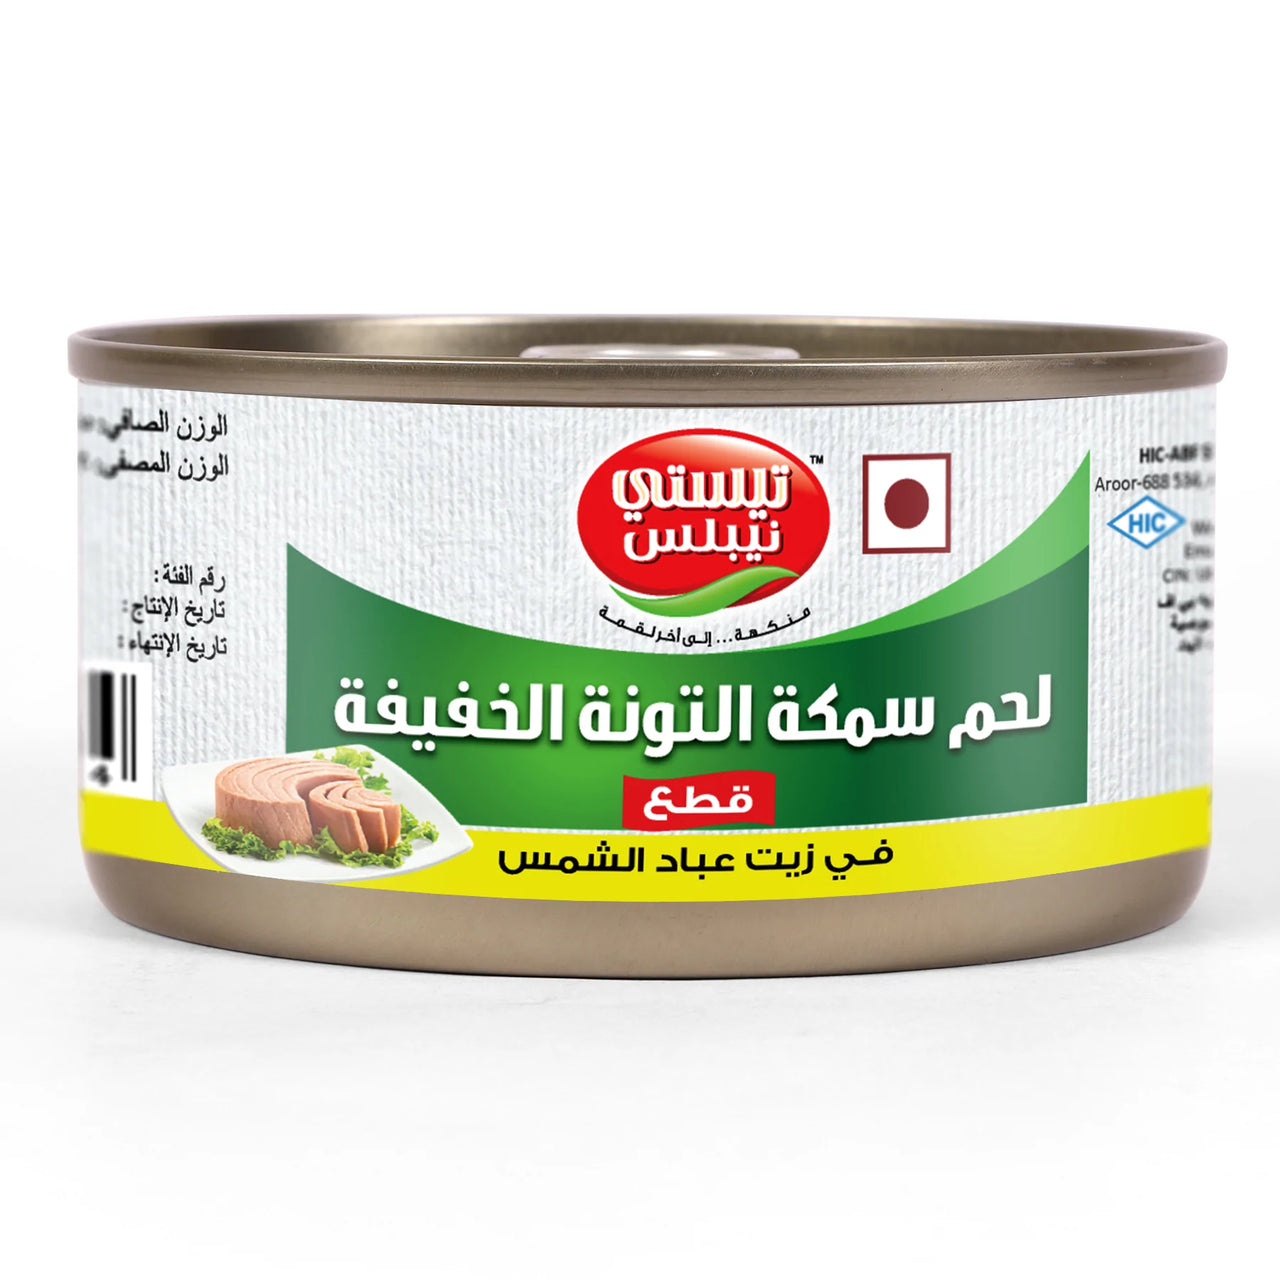 TASTY NIBLLES-Canned Tuna Chunks- Light Meat In Sunflower Oil-185g